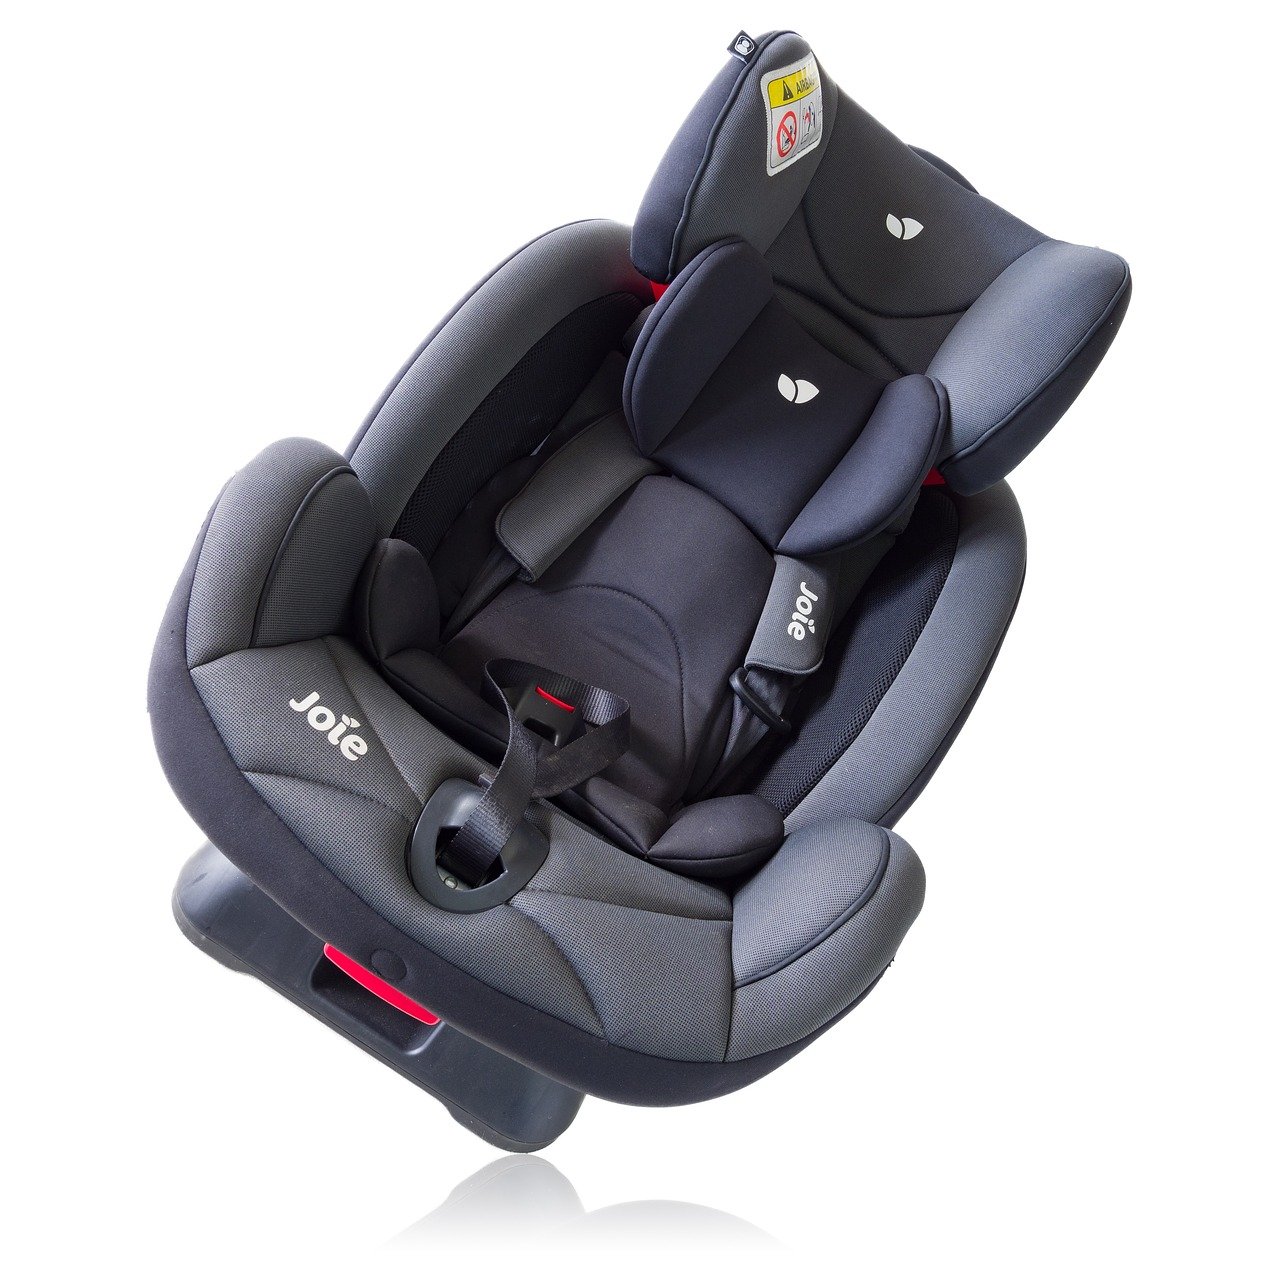 What should I consider when choosing a car seat?